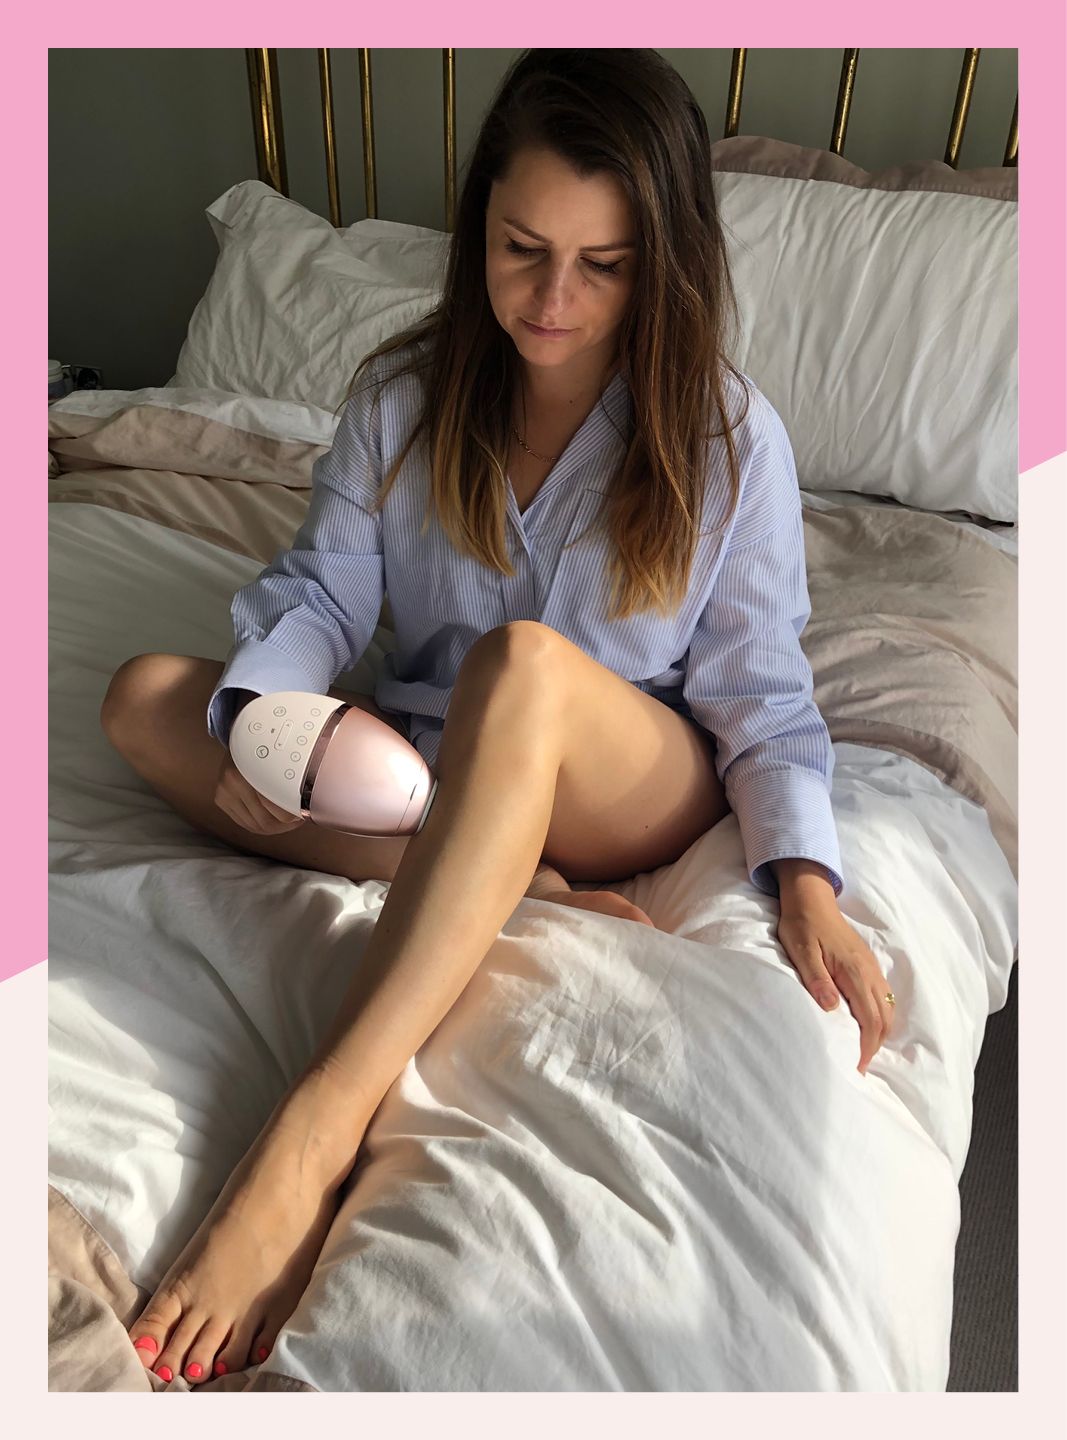 I tried at-home IPL for 8 weeks - here's what I learned